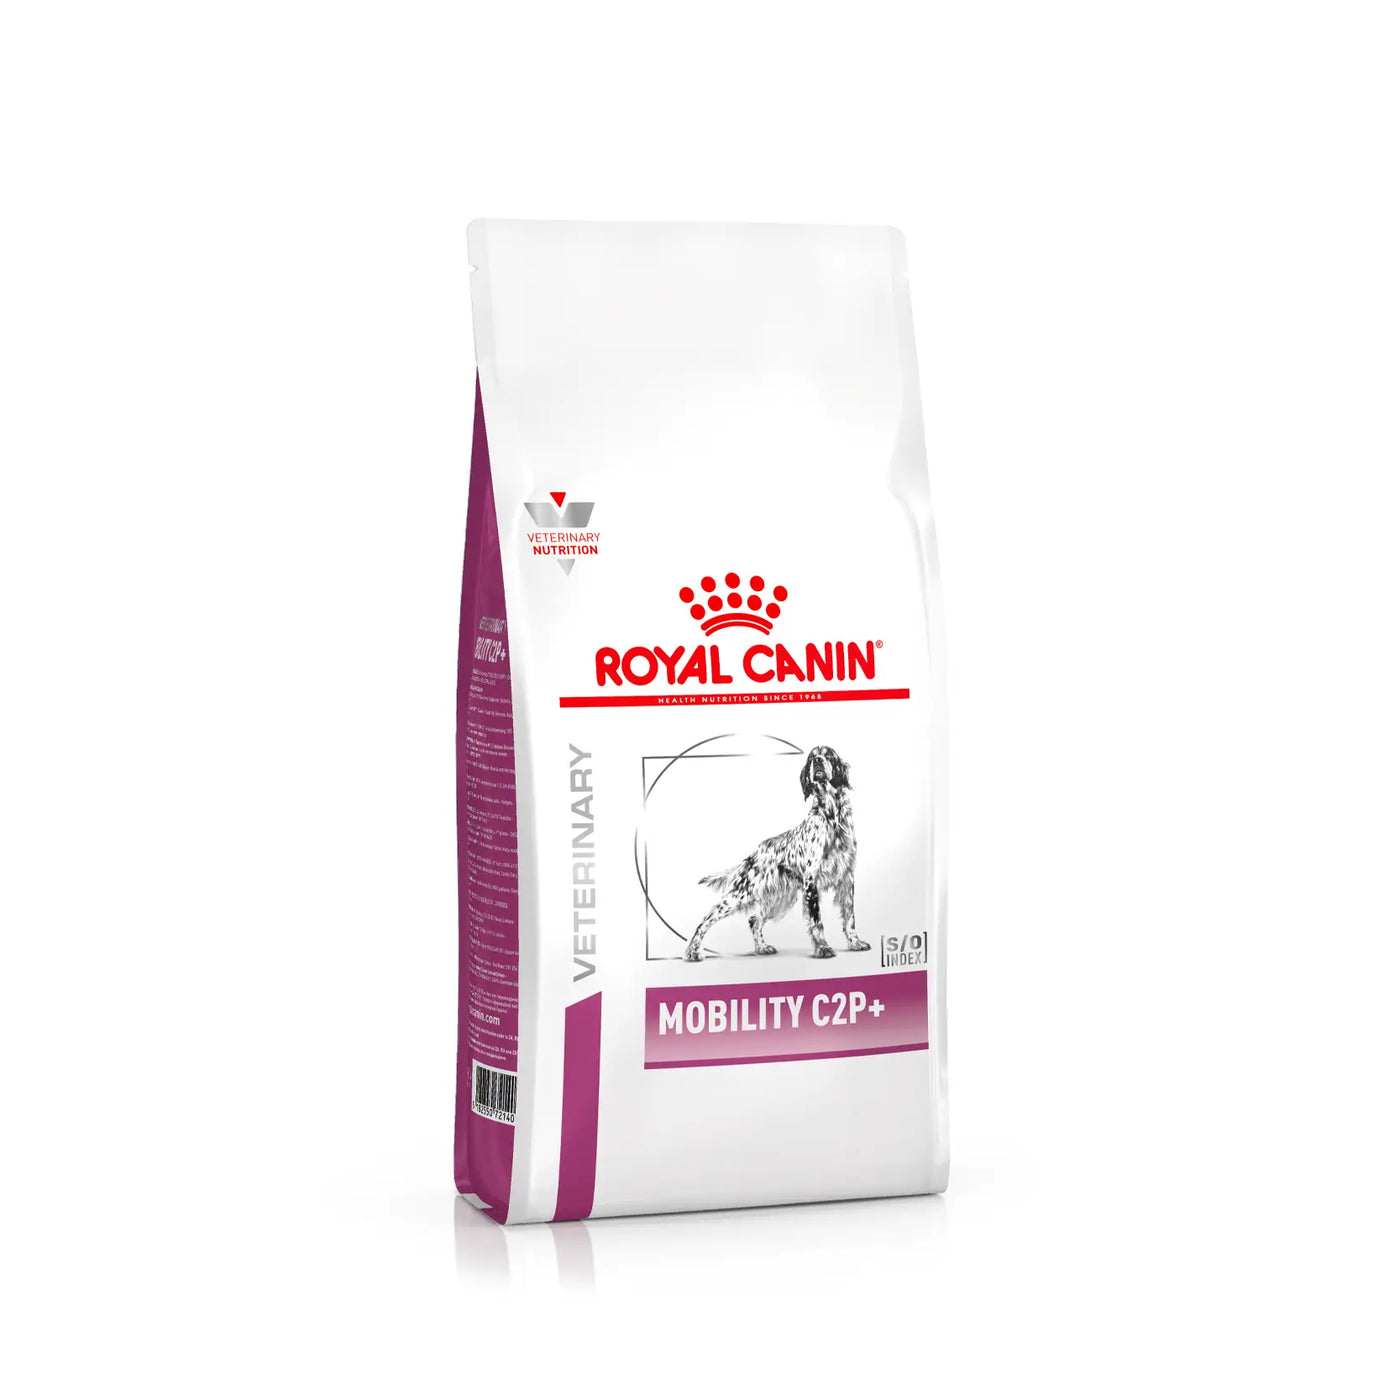 Royal Canin - Canine Mobility C2P+